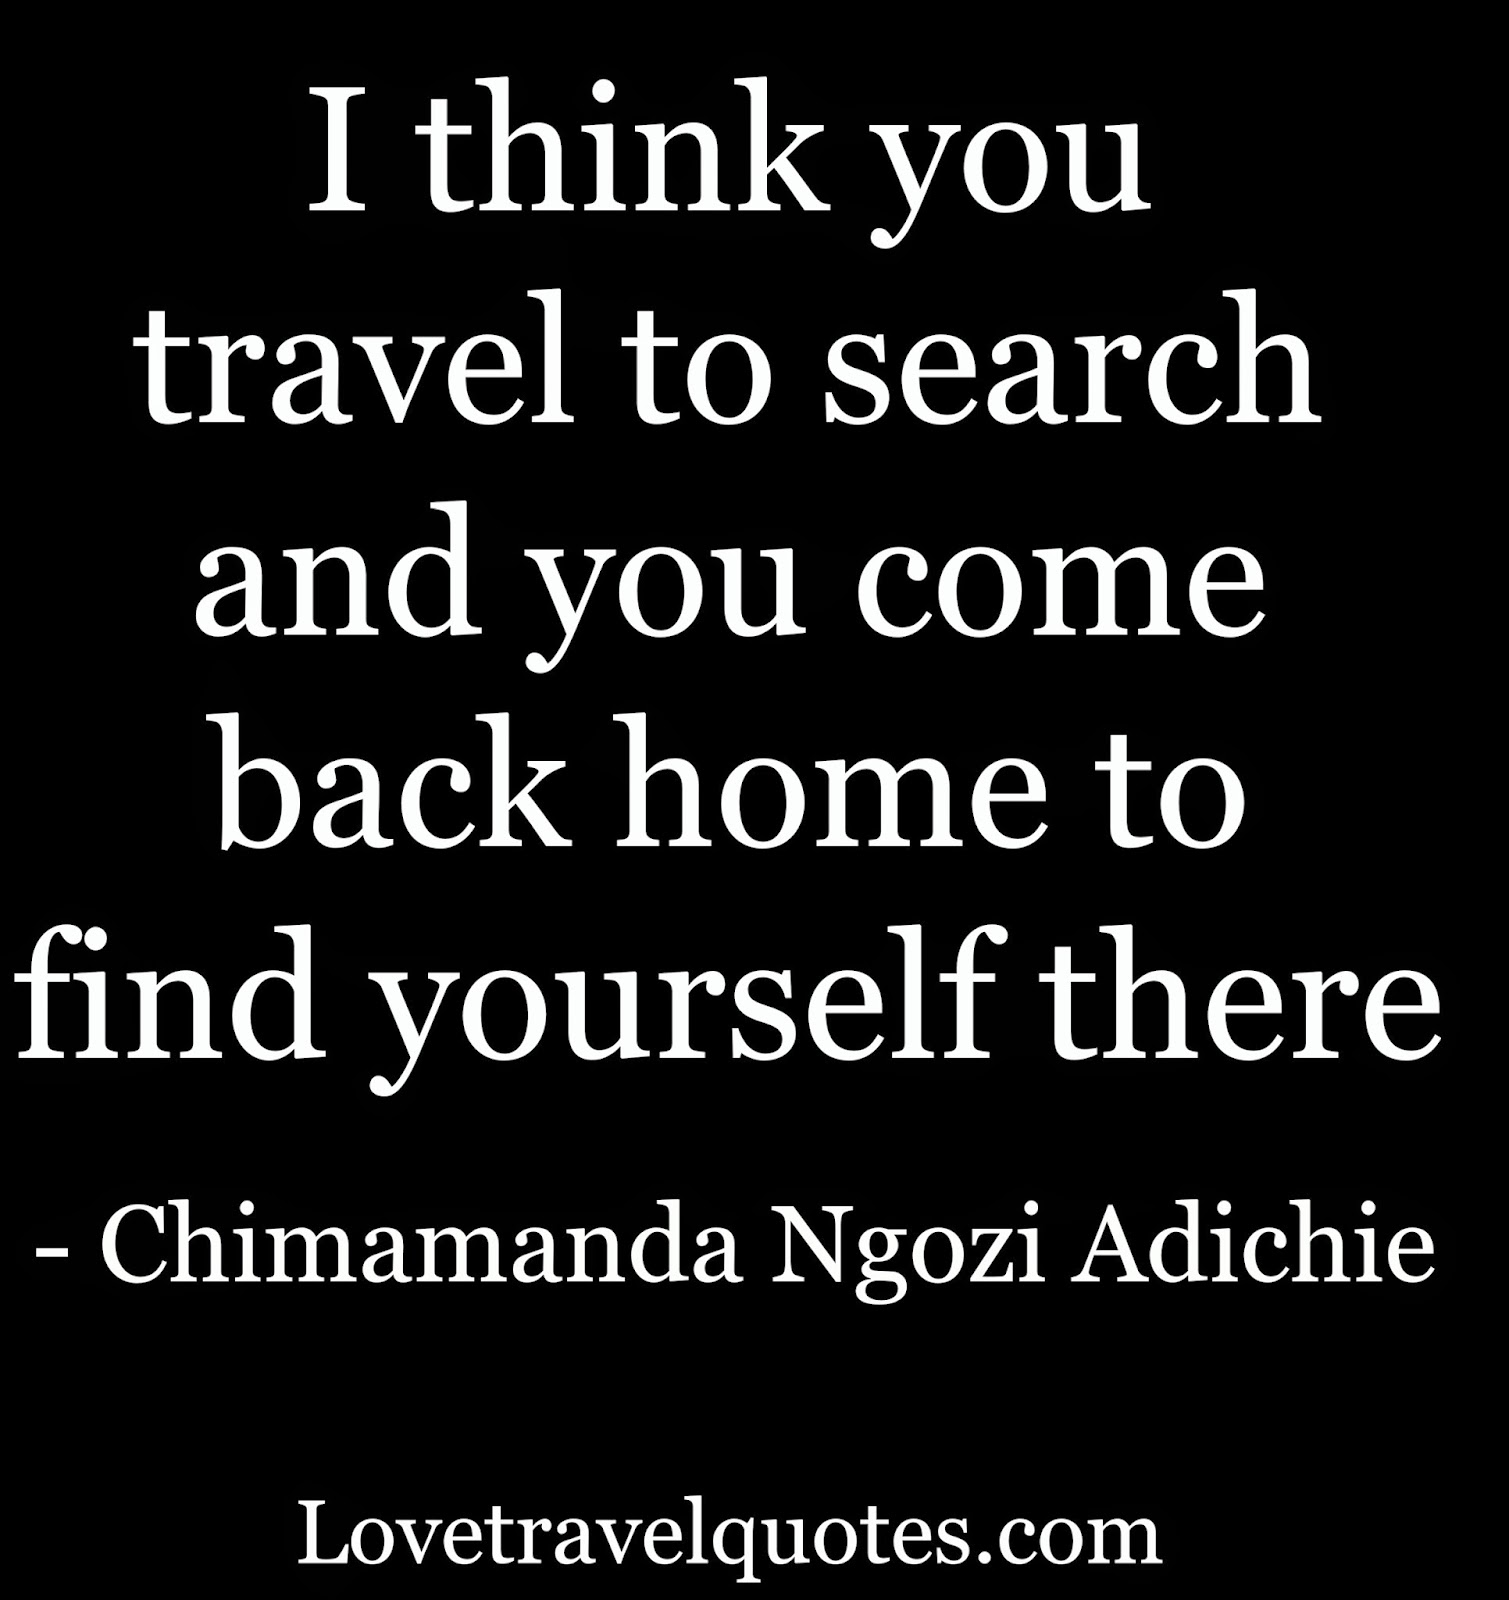 I think you travel to search and you come back home to find yourself there